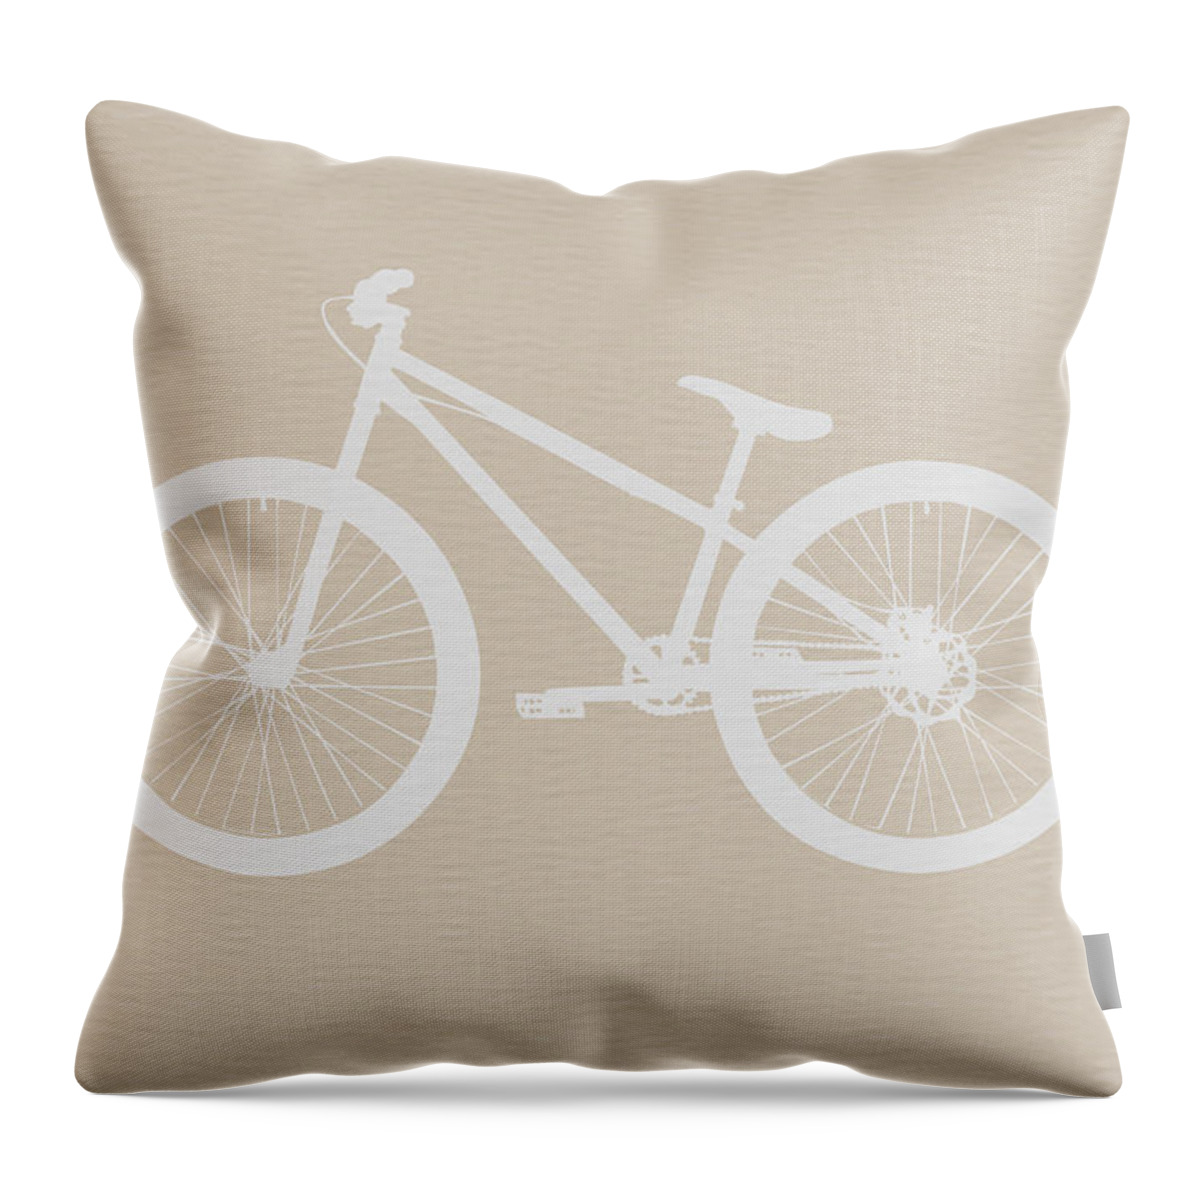 Bicycle Throw Pillow featuring the digital art Bicycle Brown Poster by Naxart Studio